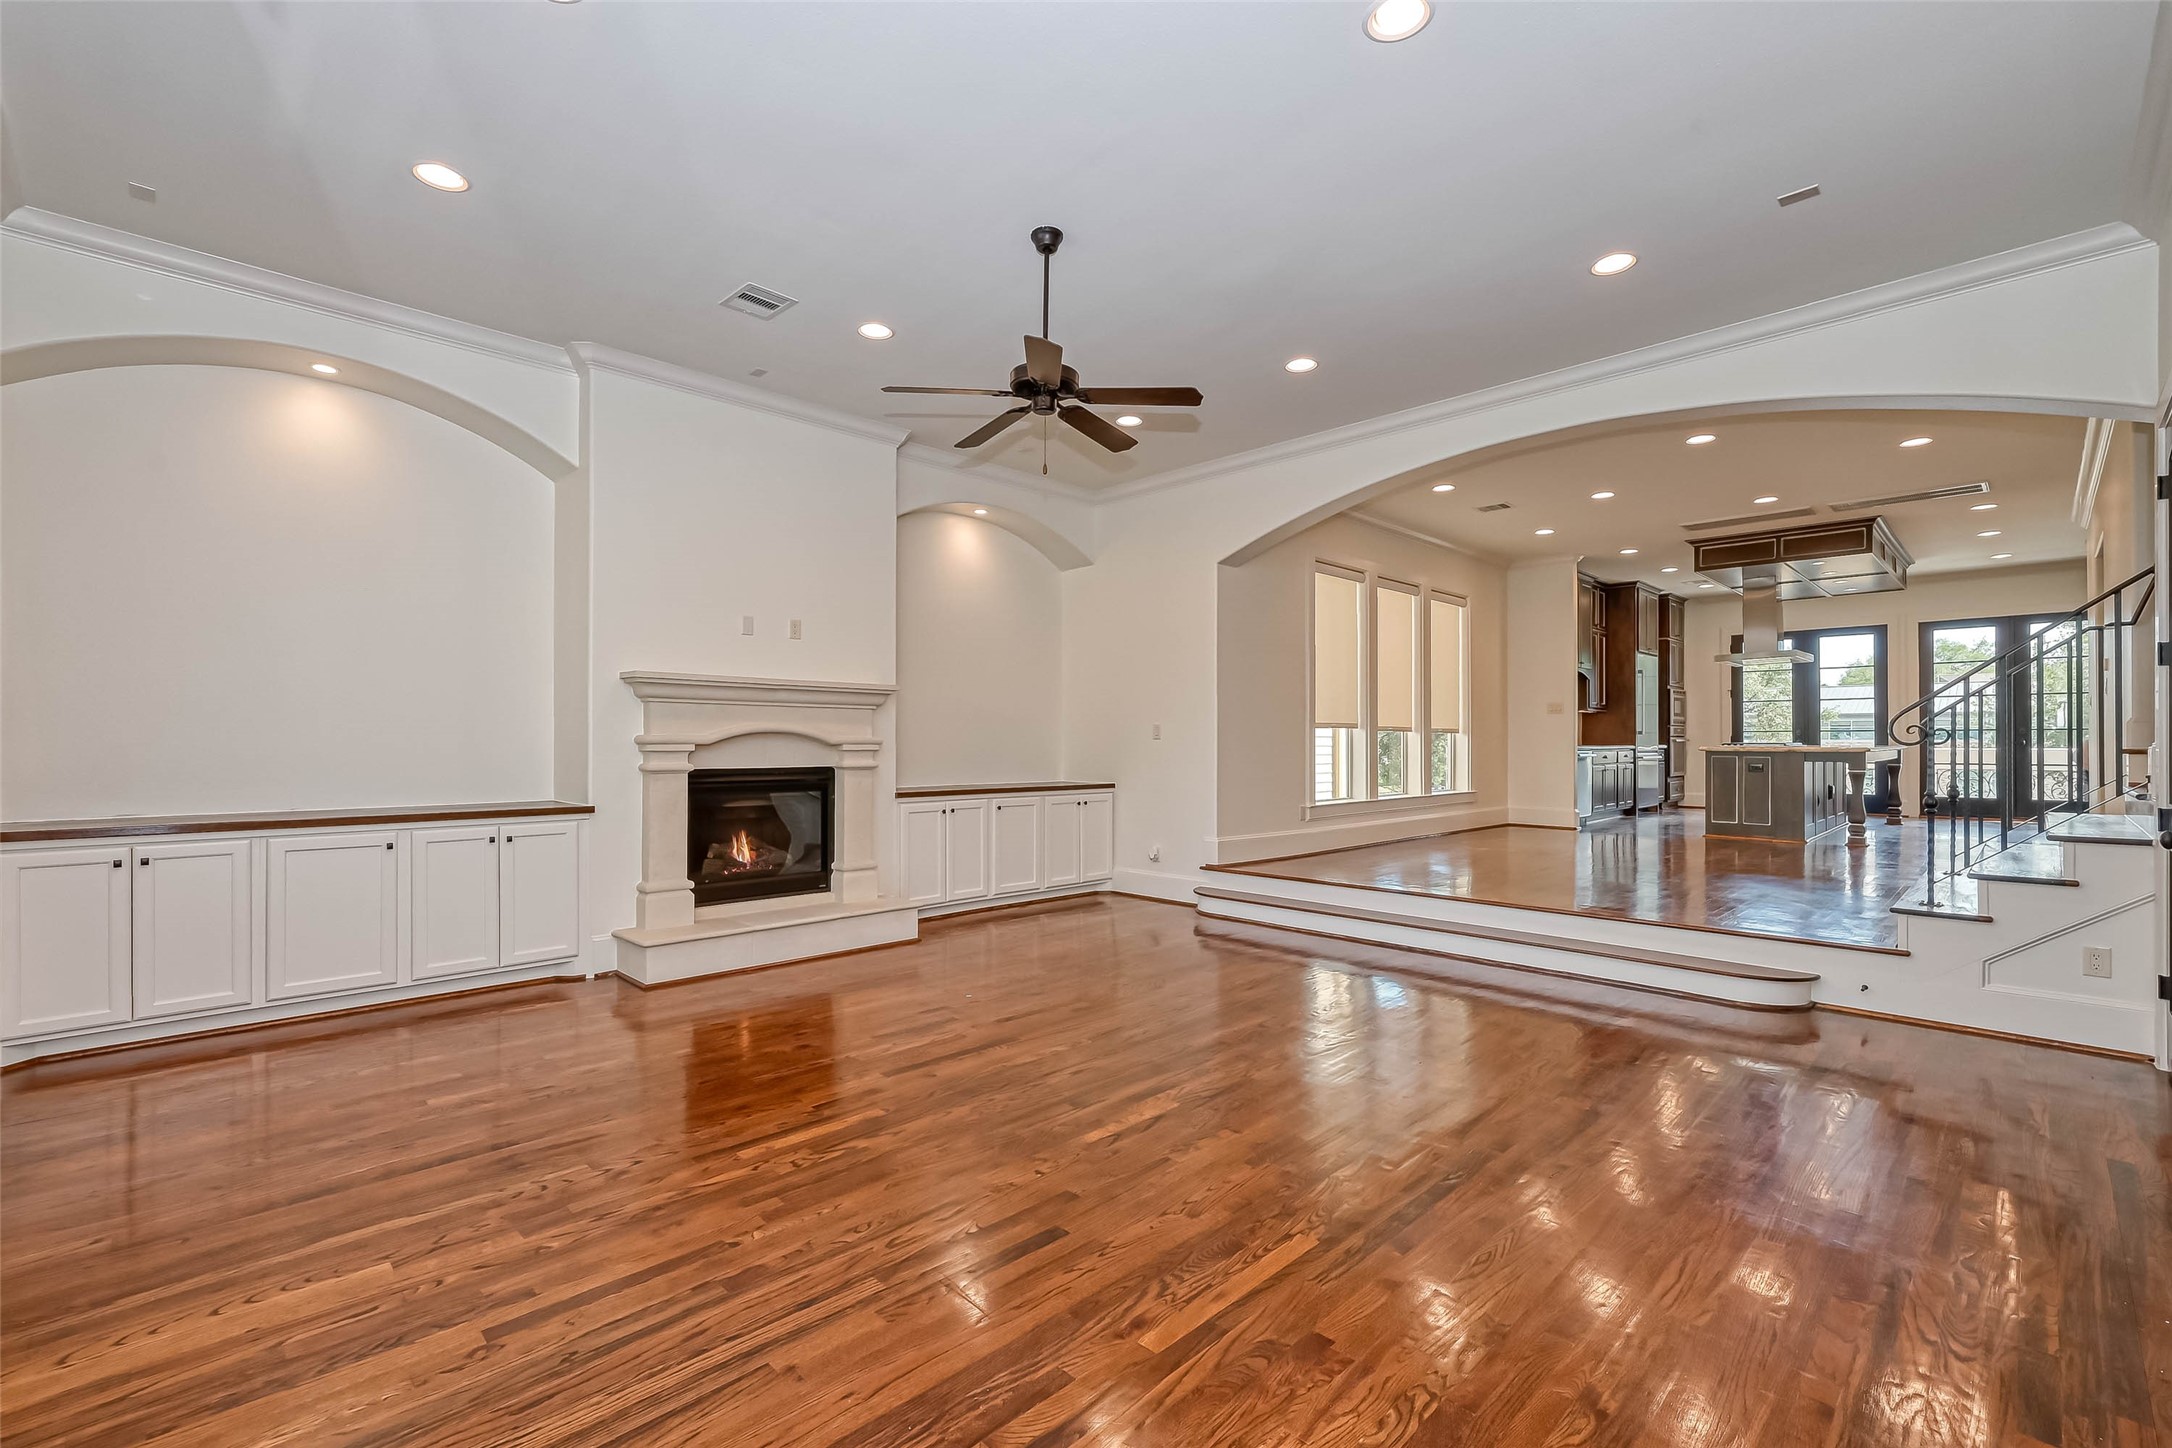 Overview of the living room featuring wood flooring and a remote control fireplace